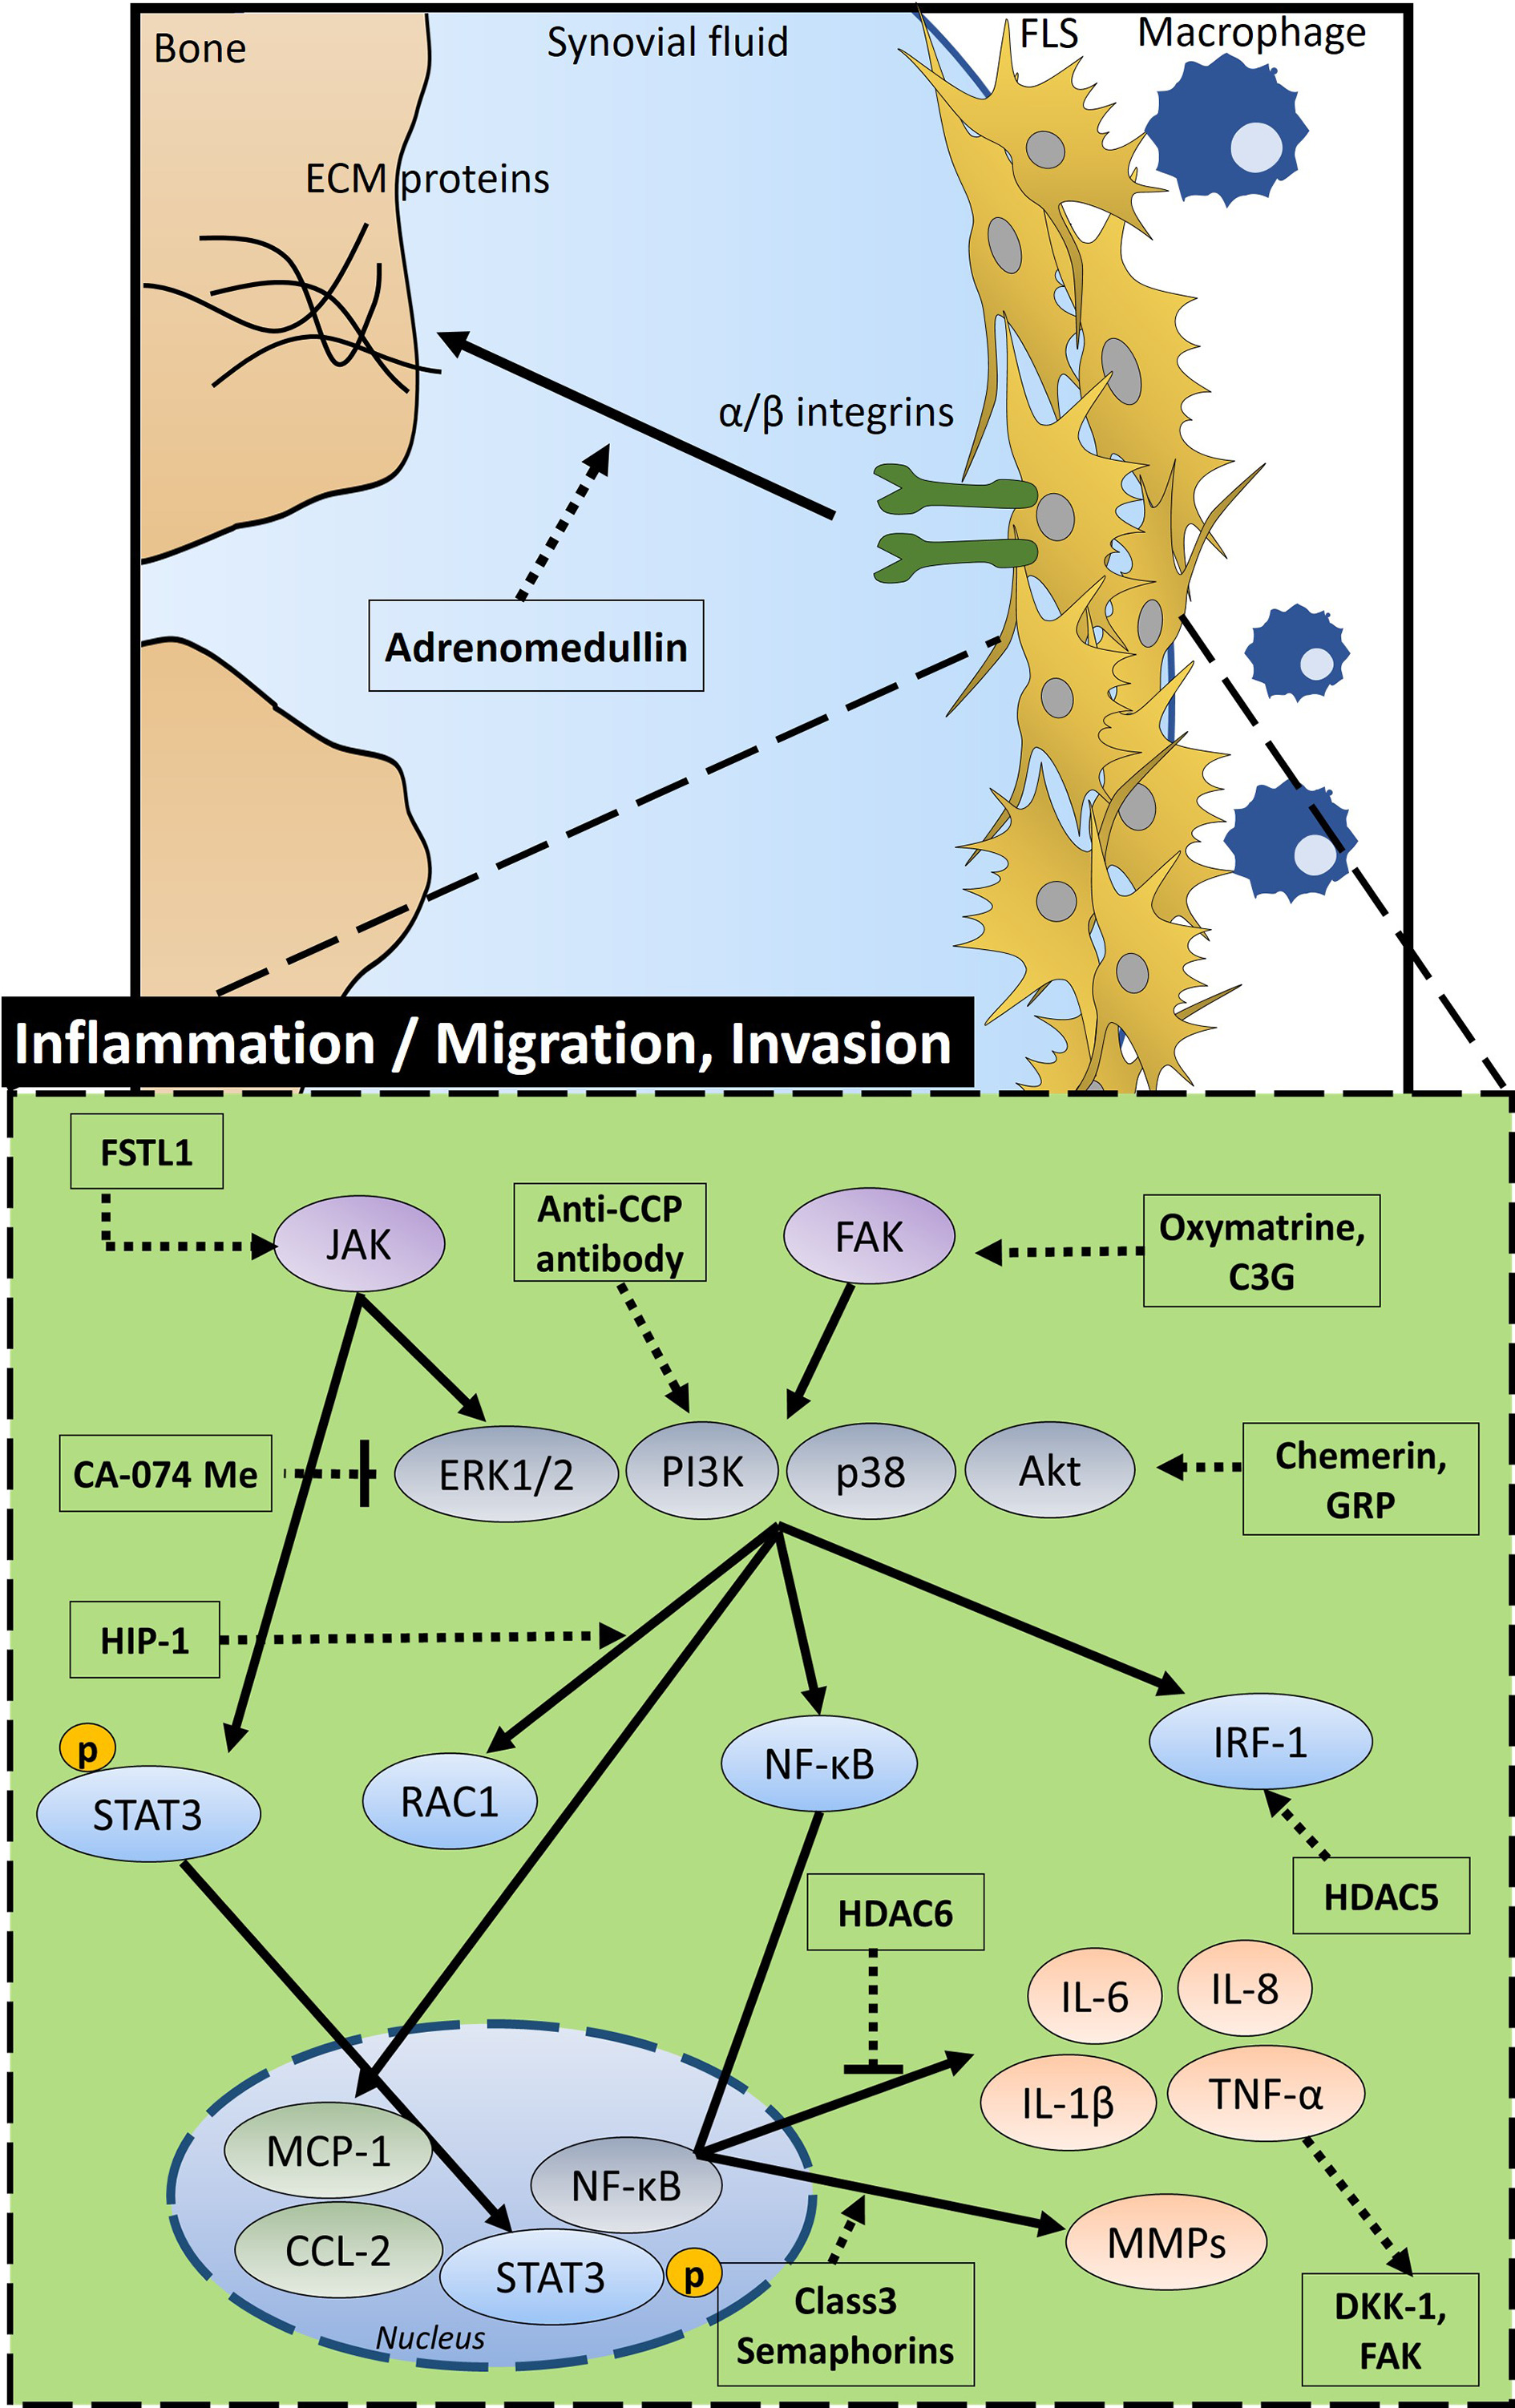 Fig. 2 
          Schematic diagram of the overall signalling mechanism and related factors of inflammatory activity, migration, and invasion in the fibroblastic synoviocytes (FLS) of rheumatoid arthritis (RA) FSTL1 stimulates JAK signalling. Oxymatrine and C3G enhance FAK signalling. Anti-CCP antibody activates PI3K. JAK induces activation of extracellular signal‑regulated protein kinase 1/2 (ERK1/2) and pSTAT3, FAK activates phosphoinositide 3-kinase (PI3K), p38, and protein kinase B (Akt) signalling. Chemerin and GRP activate PI3K/Akt signalling, but CA-074Me inhibits this signalling. HIP-1 activates RAC1 and HDAC5 activates interferon regulatory factor 1 (IRF-1) through PI3K/Akt signalling. HDAC6 inhibits inflammatory factors such as interleukin (IL)-6 and tumour necrosis factor-α (TNF-α) through nuclear factor kappa-B (NF-κB) transcription in the nucleus, whereas class 3 semaphorins increase levels of matrix metalloproteinases (MMPs). In addition, increased TNF-α enhances DKK-1 and FAK. This signalling is involved in the inflammation, migration, and invasion of FLS. C3G, cyanidin-3-glucoside; DKK-1, Dickkopf-1; FAK: integrin-related focal adhesion kinase; pSTAT3: phosphorylated signal transducer and activator of transcription 3; GRP, gastrin-releasing peptide; HIP-1, Huntingtin-interacting protein-1; HDAC, histone deacetylase; FSTL1, follistatin-like protein 1; ECM proteins, extracellular matrix proteins; anti-CCP, anti-cyclic citrullinated peptide.
        